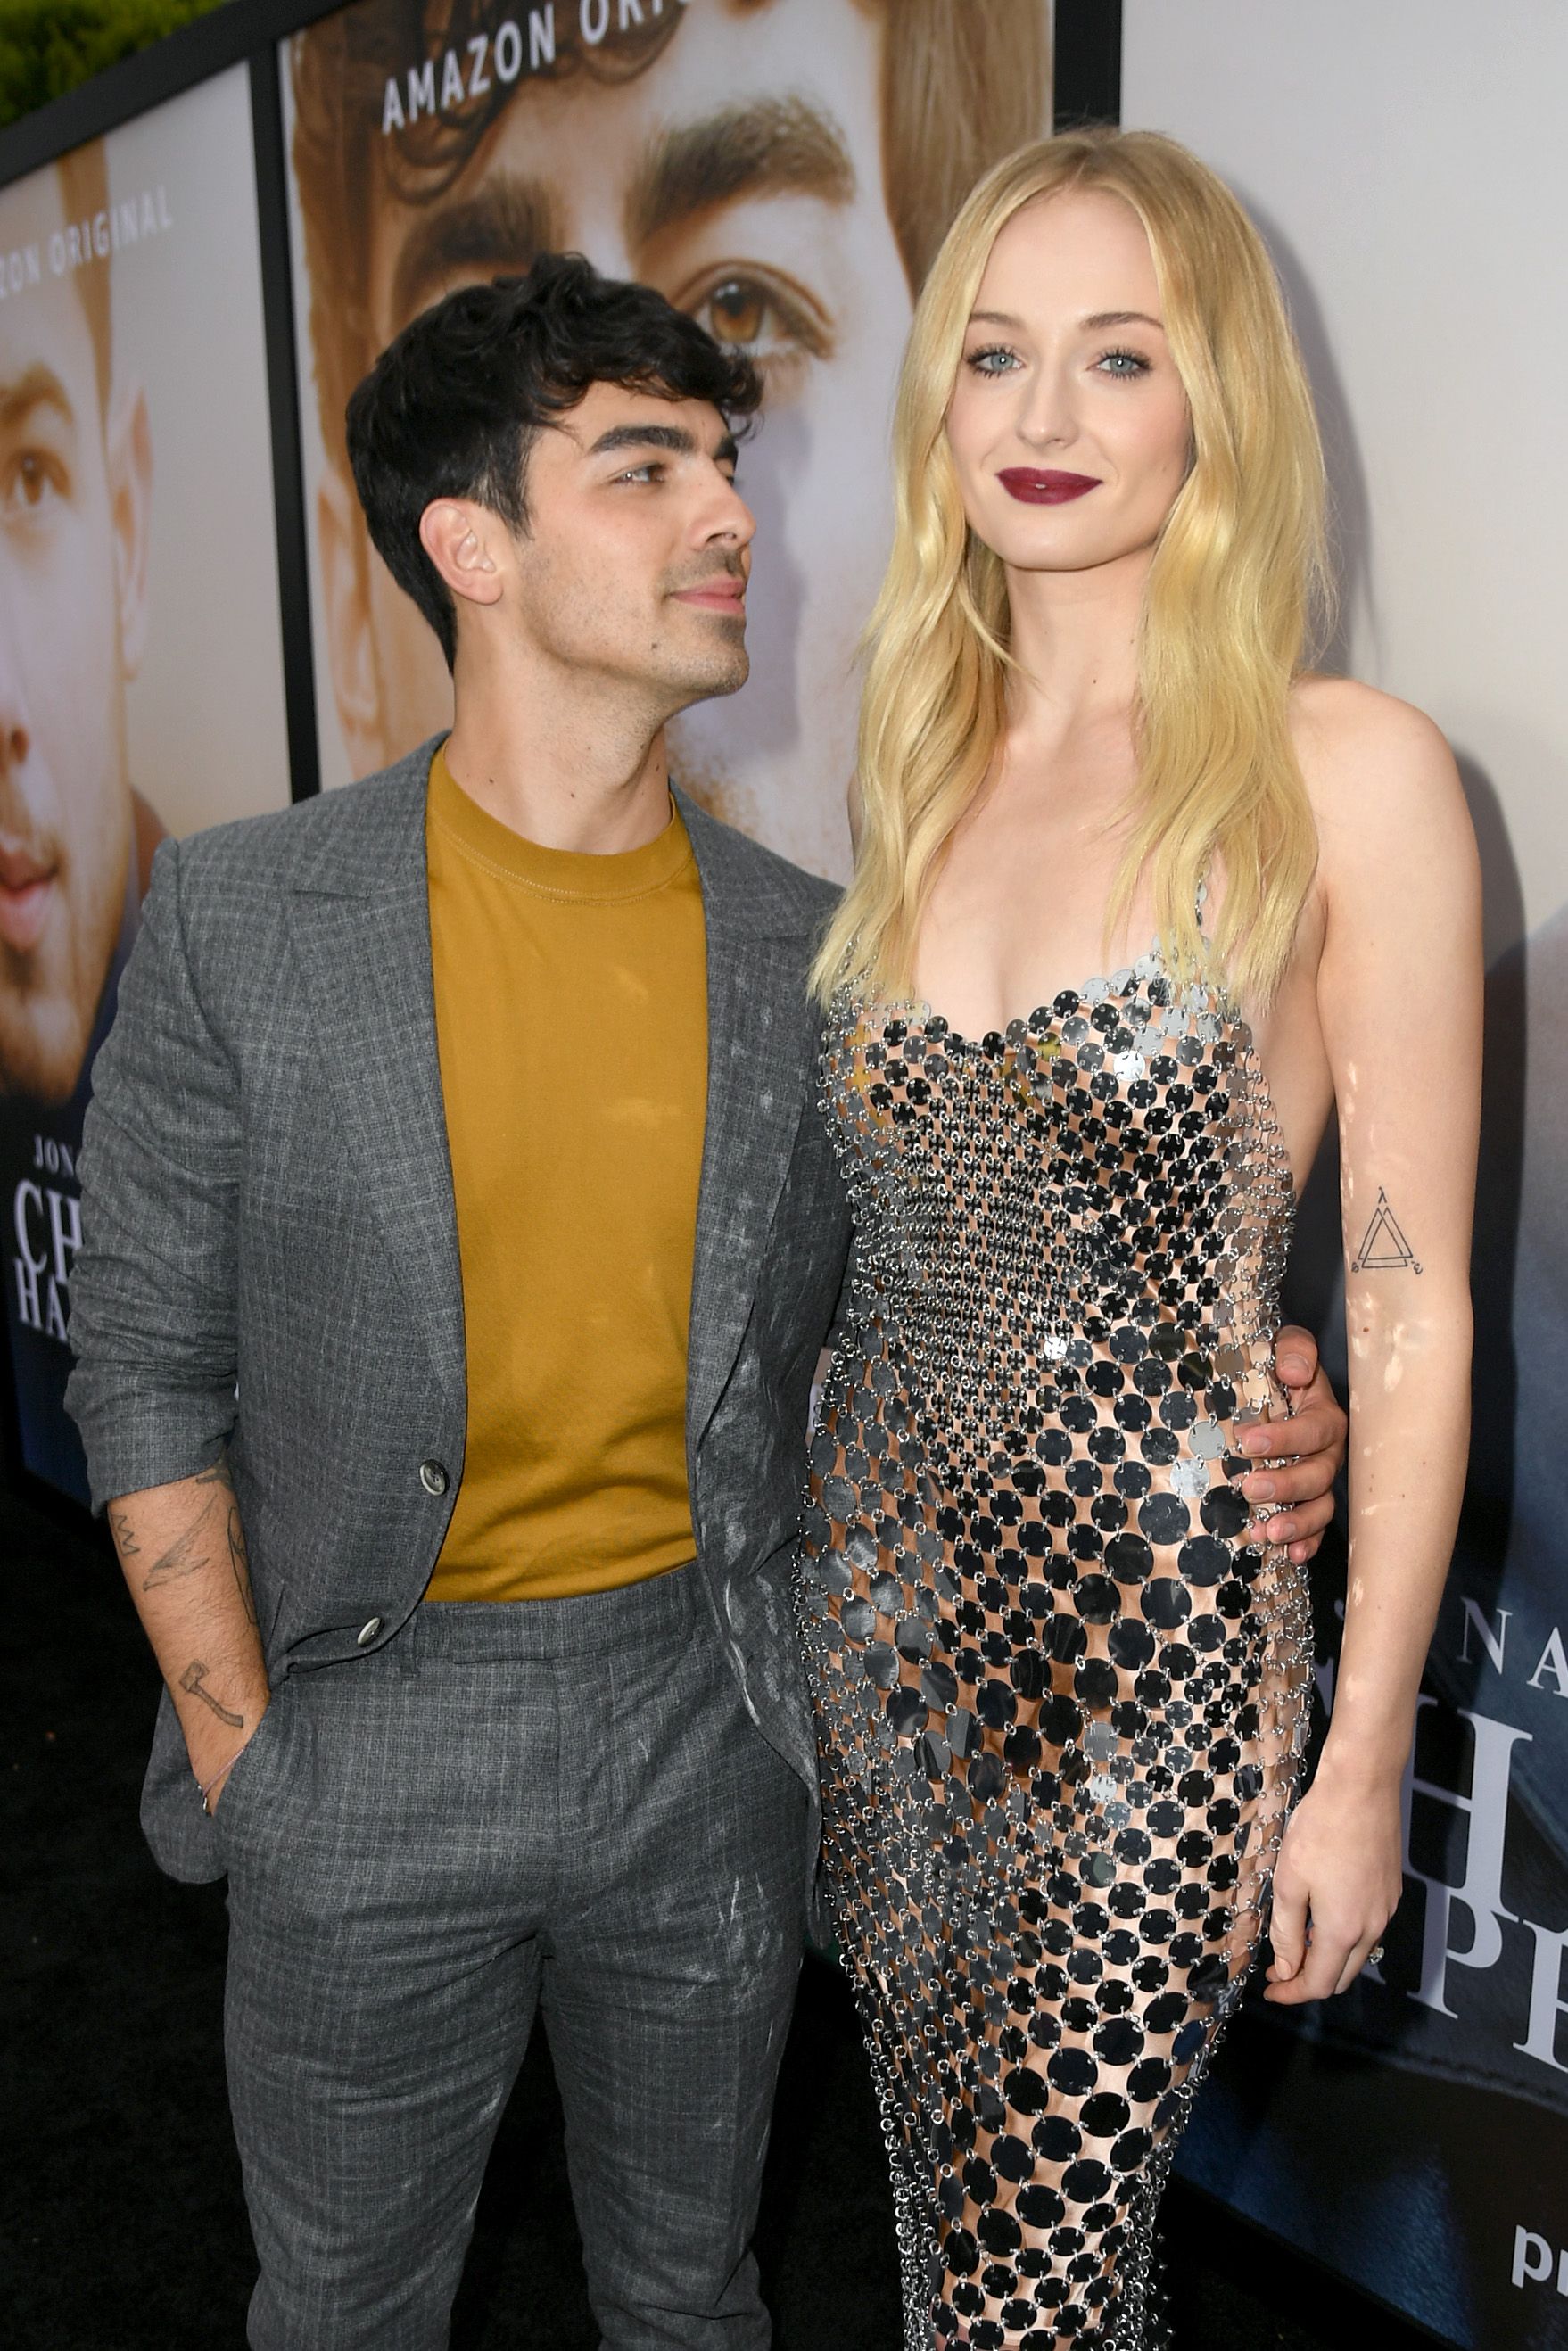 Joe Jonas and Sophie Turner during the Premiere of Amazon Prime Video's 'Chasing Happiness' at Regency Bruin Theatre on June 03, 2019 in Los Angeles, California. | Source: Getty Images